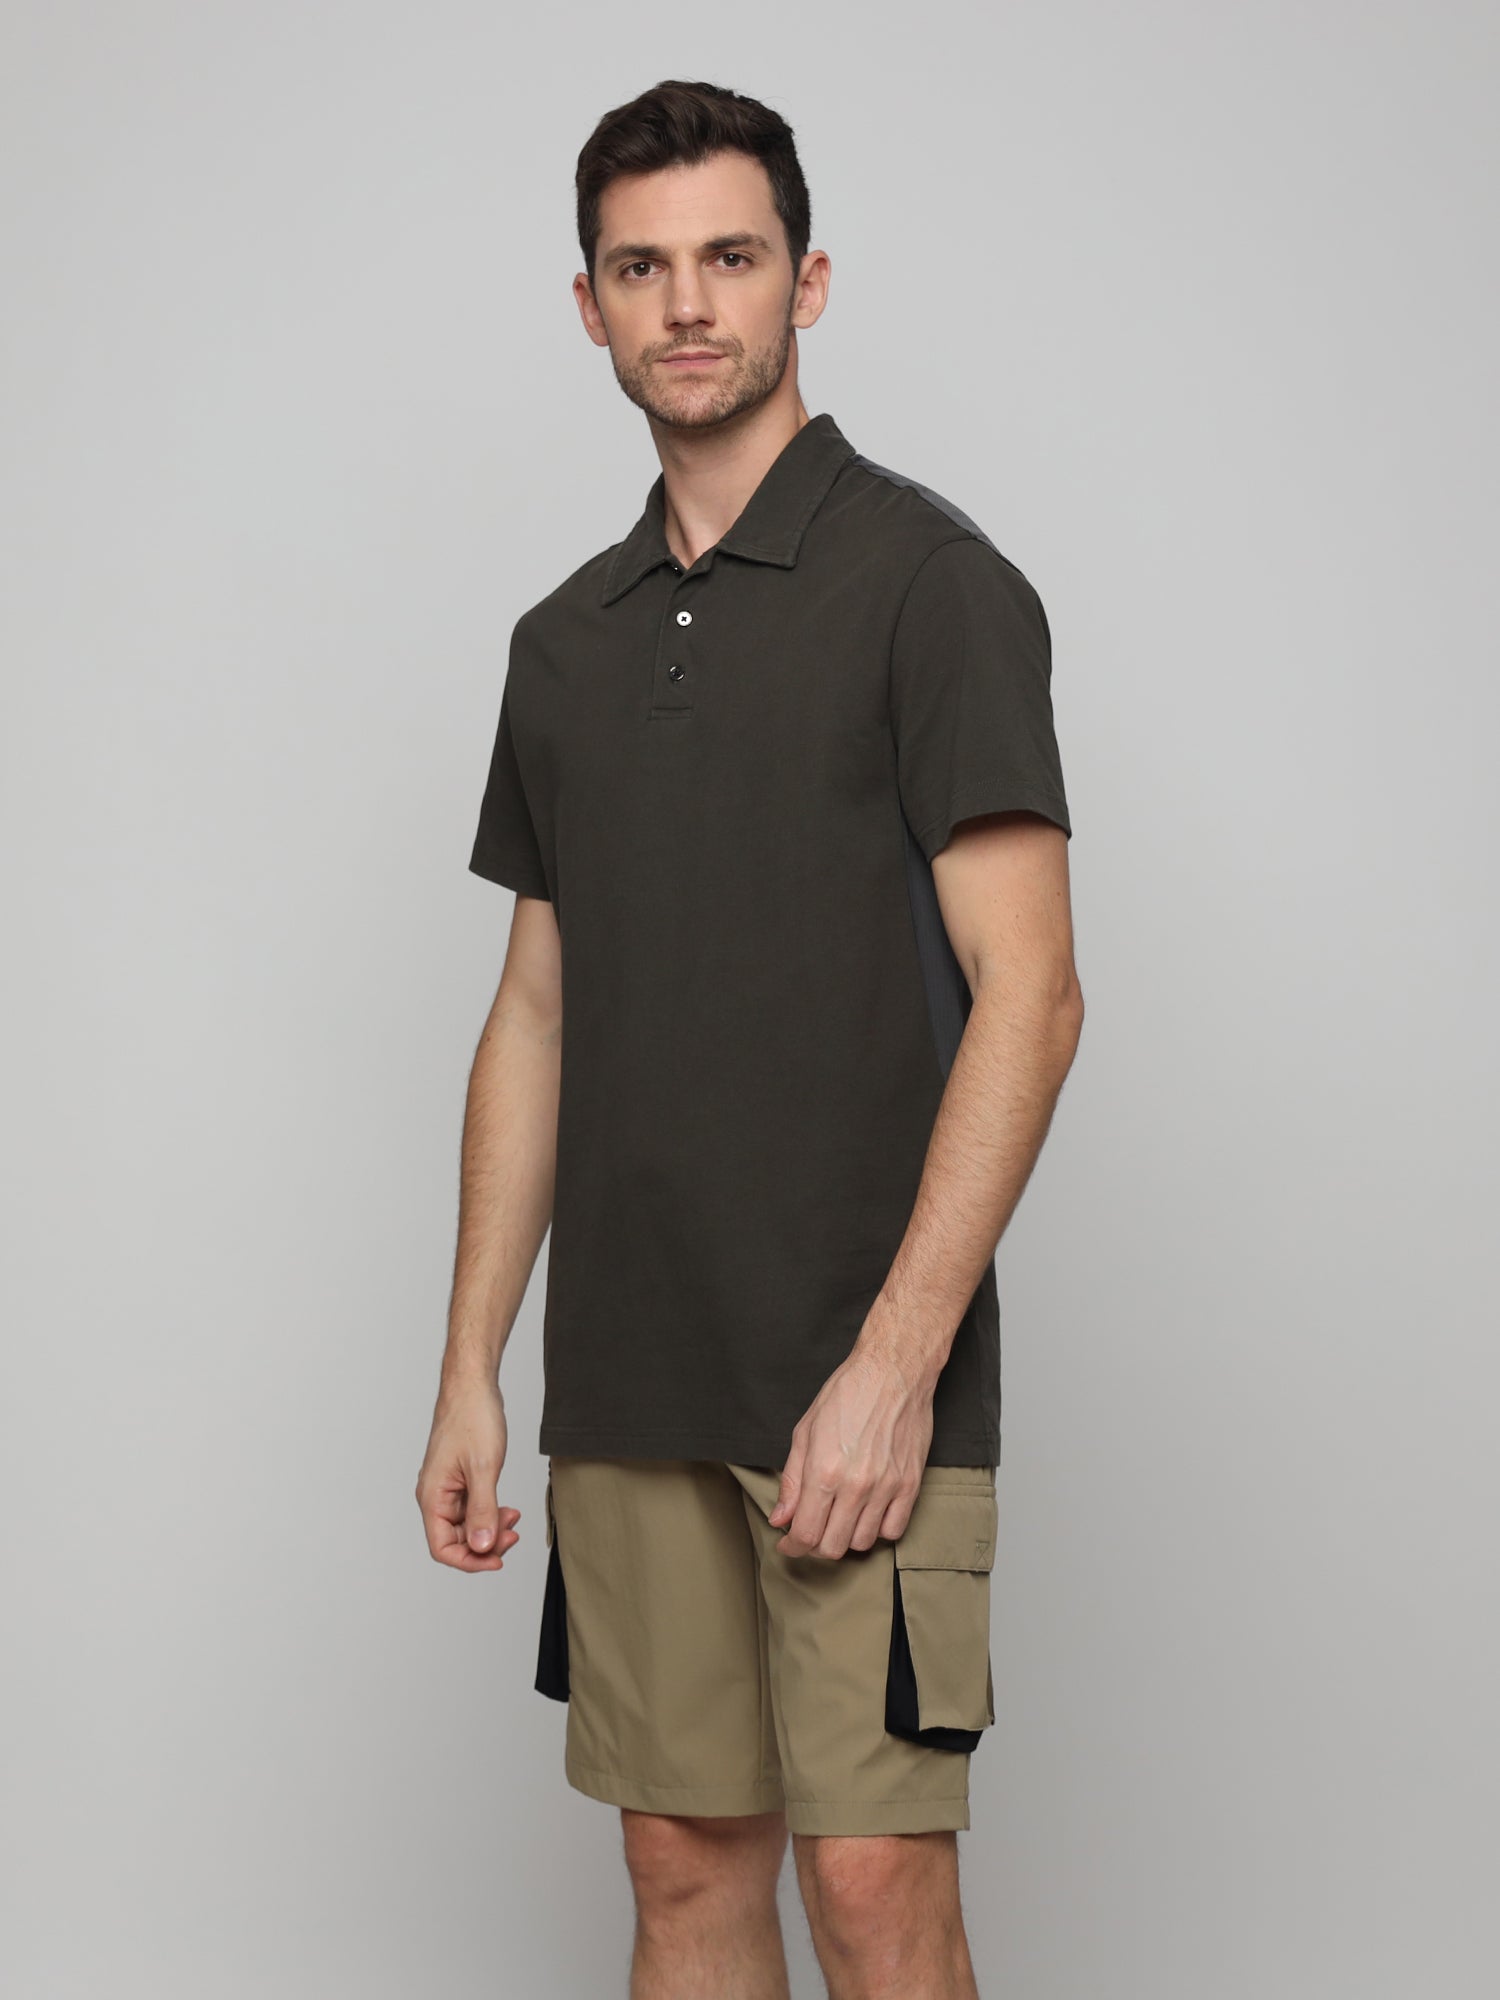 Unisex Everyday Polo Male T-shirt Army